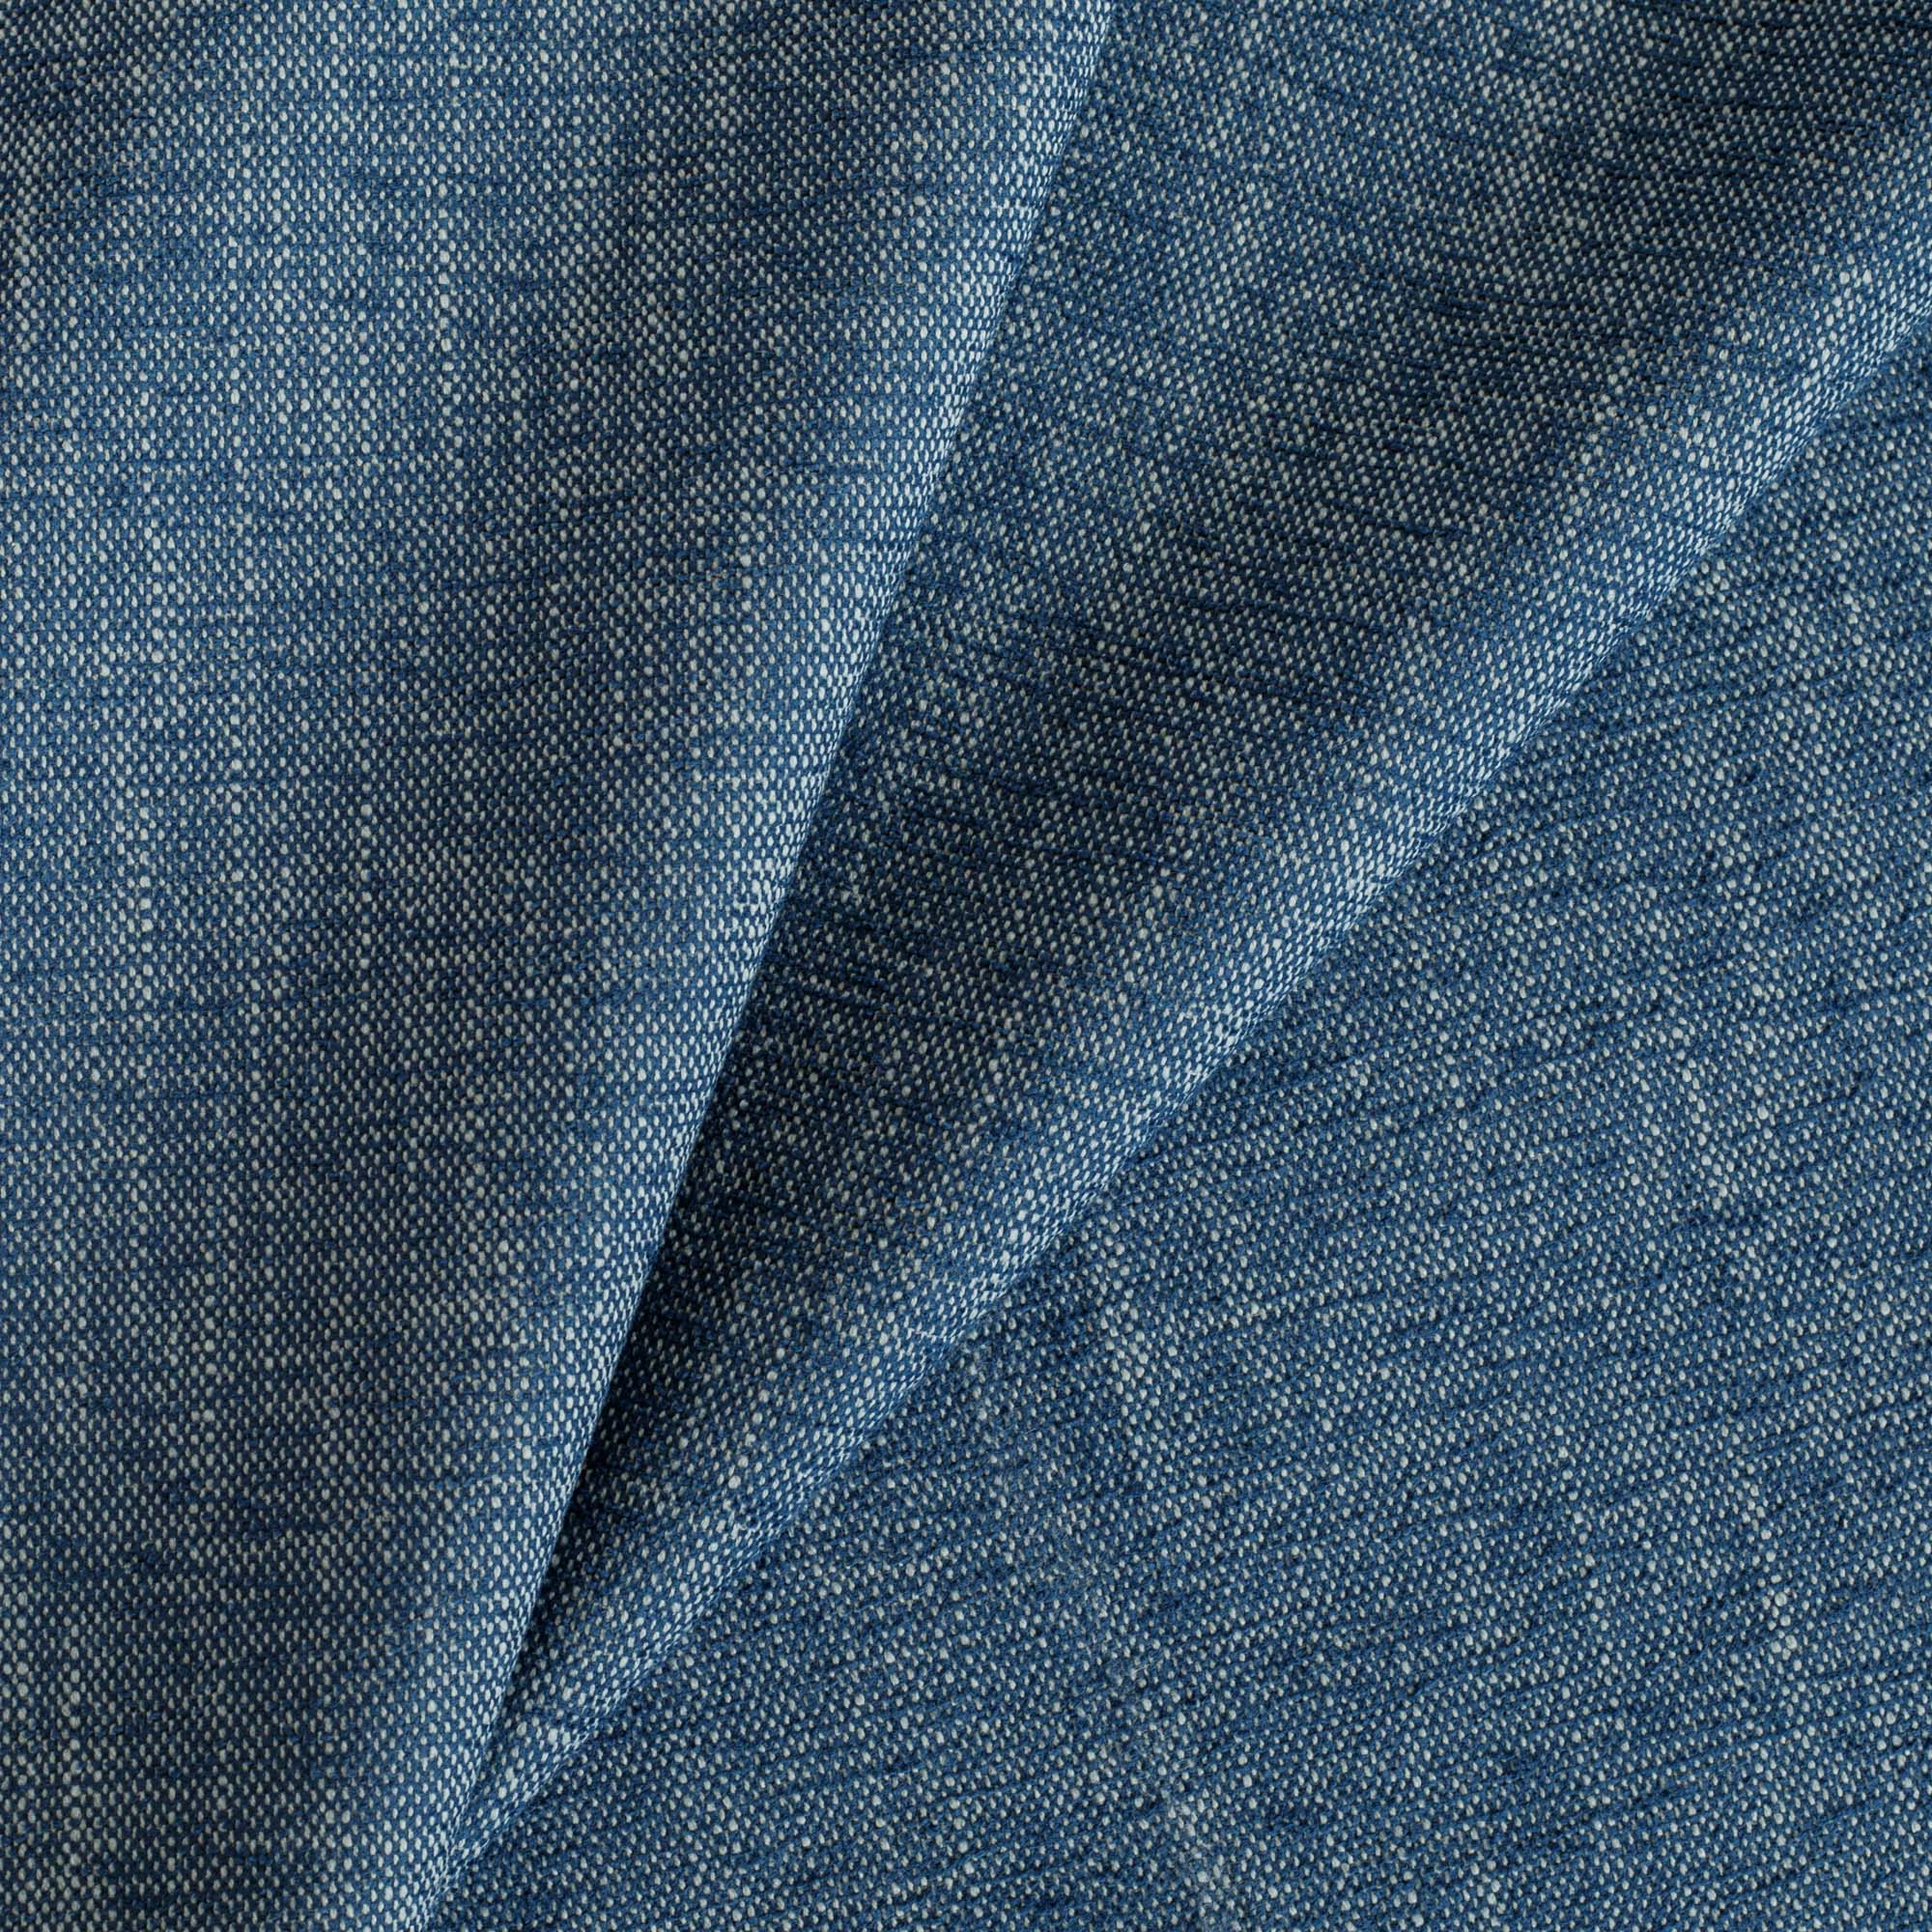 Parker InsideOut Fabric Indigo, a blue chenille outdoor performance fabric from Tonic Living